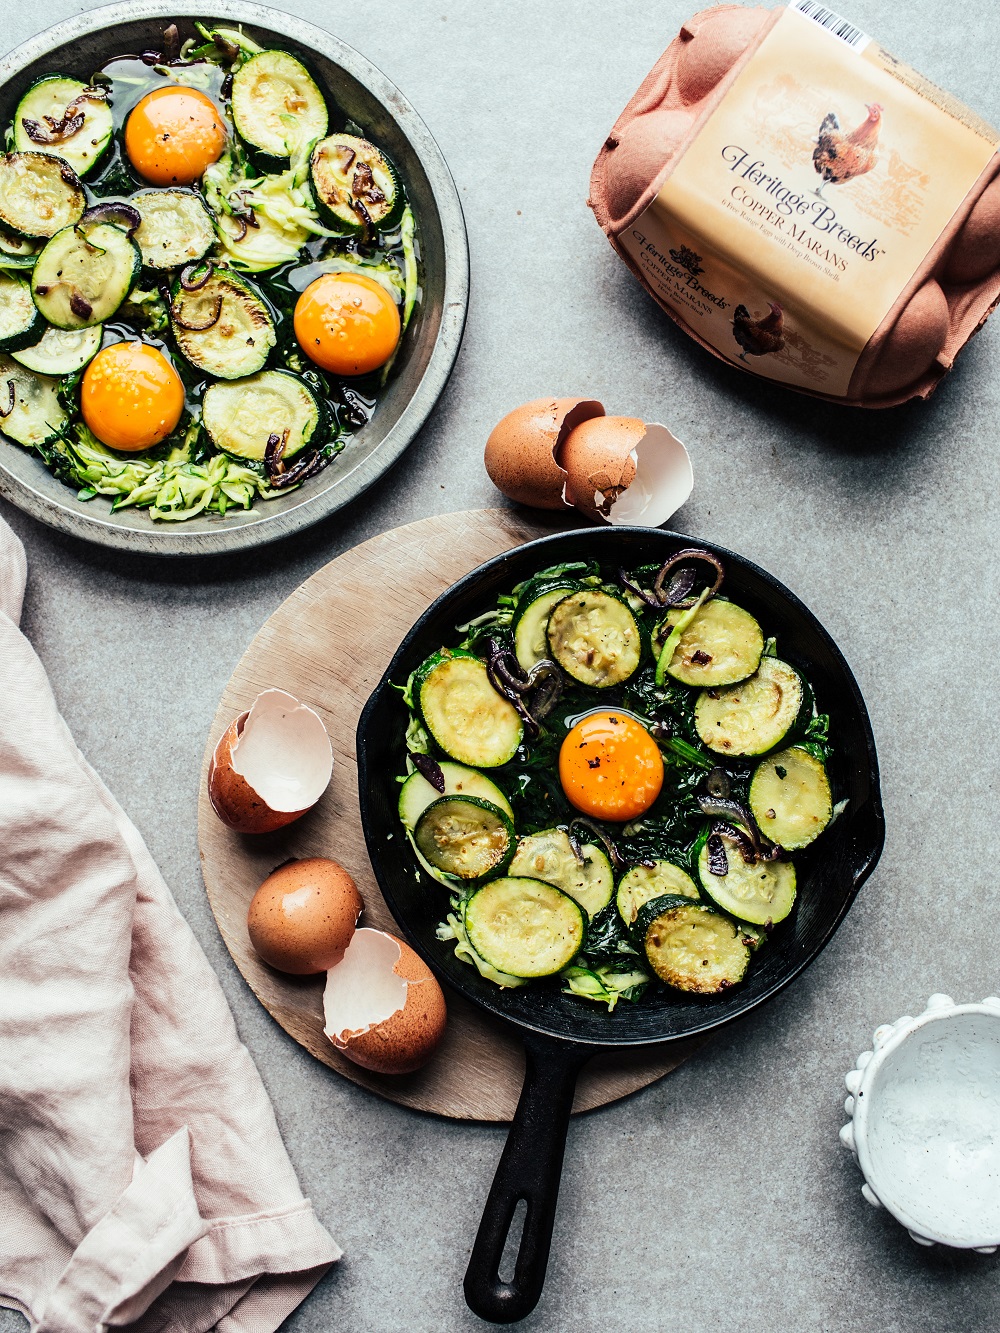 Izy’s Courgette, Basil And Feta Baked Eggs